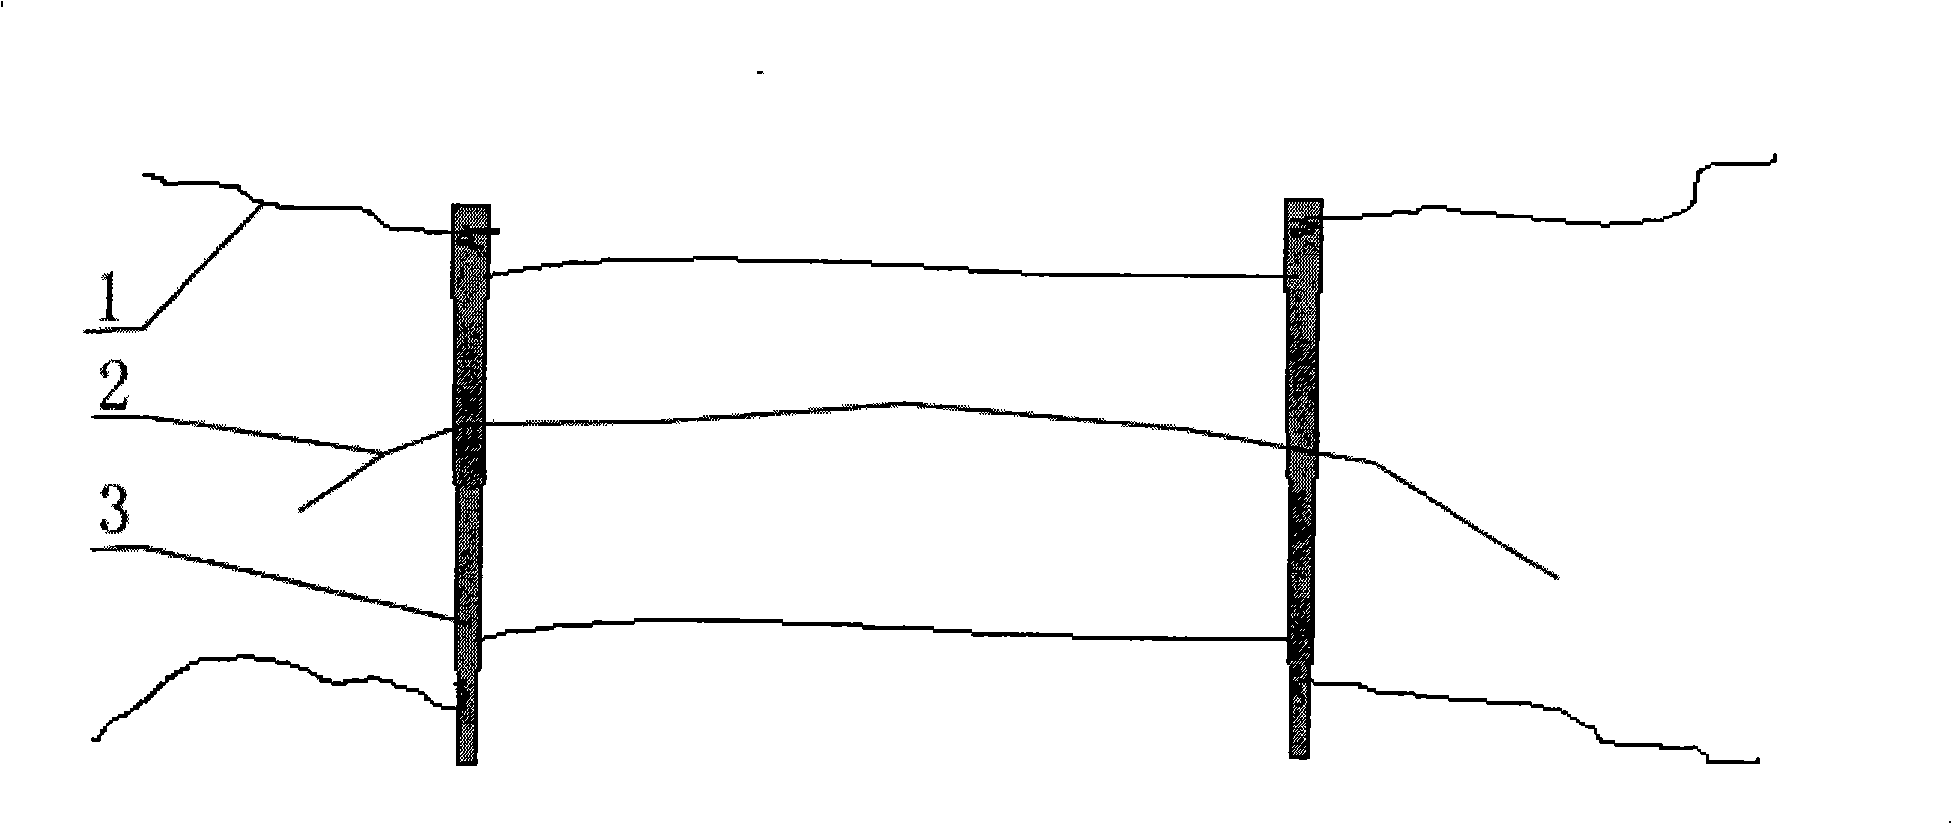 Construction method for spanning railway, highroad or 6KV alive power line without using spanning frame when expanding optical cable of new lines